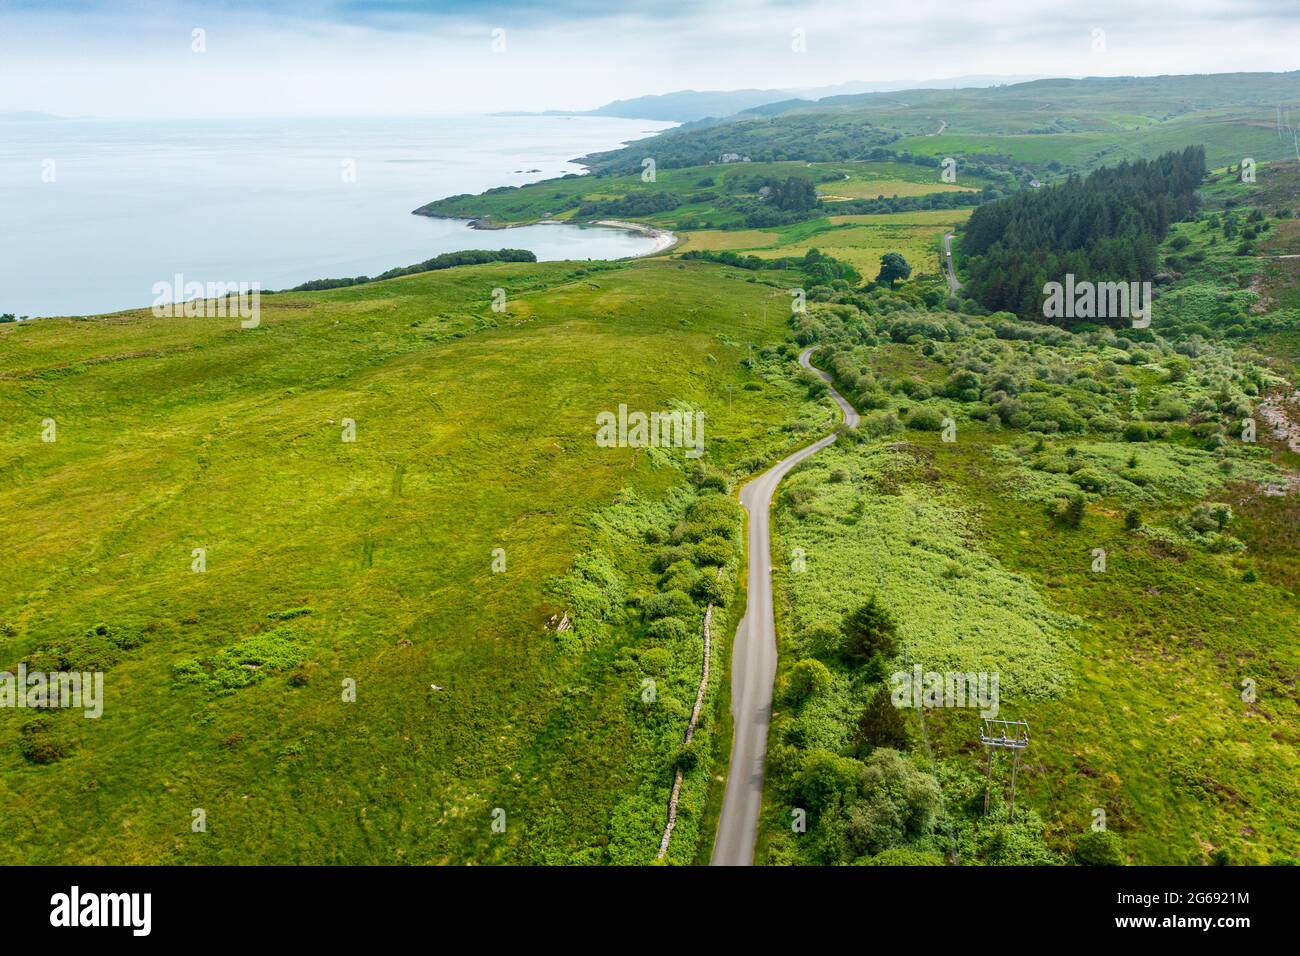 Aerial view from drone of single track rural road  on Kintyre peninsula part of the Kintyre 66 tourist driving route in Argyll & Bute, Scotland UK Stock Photo